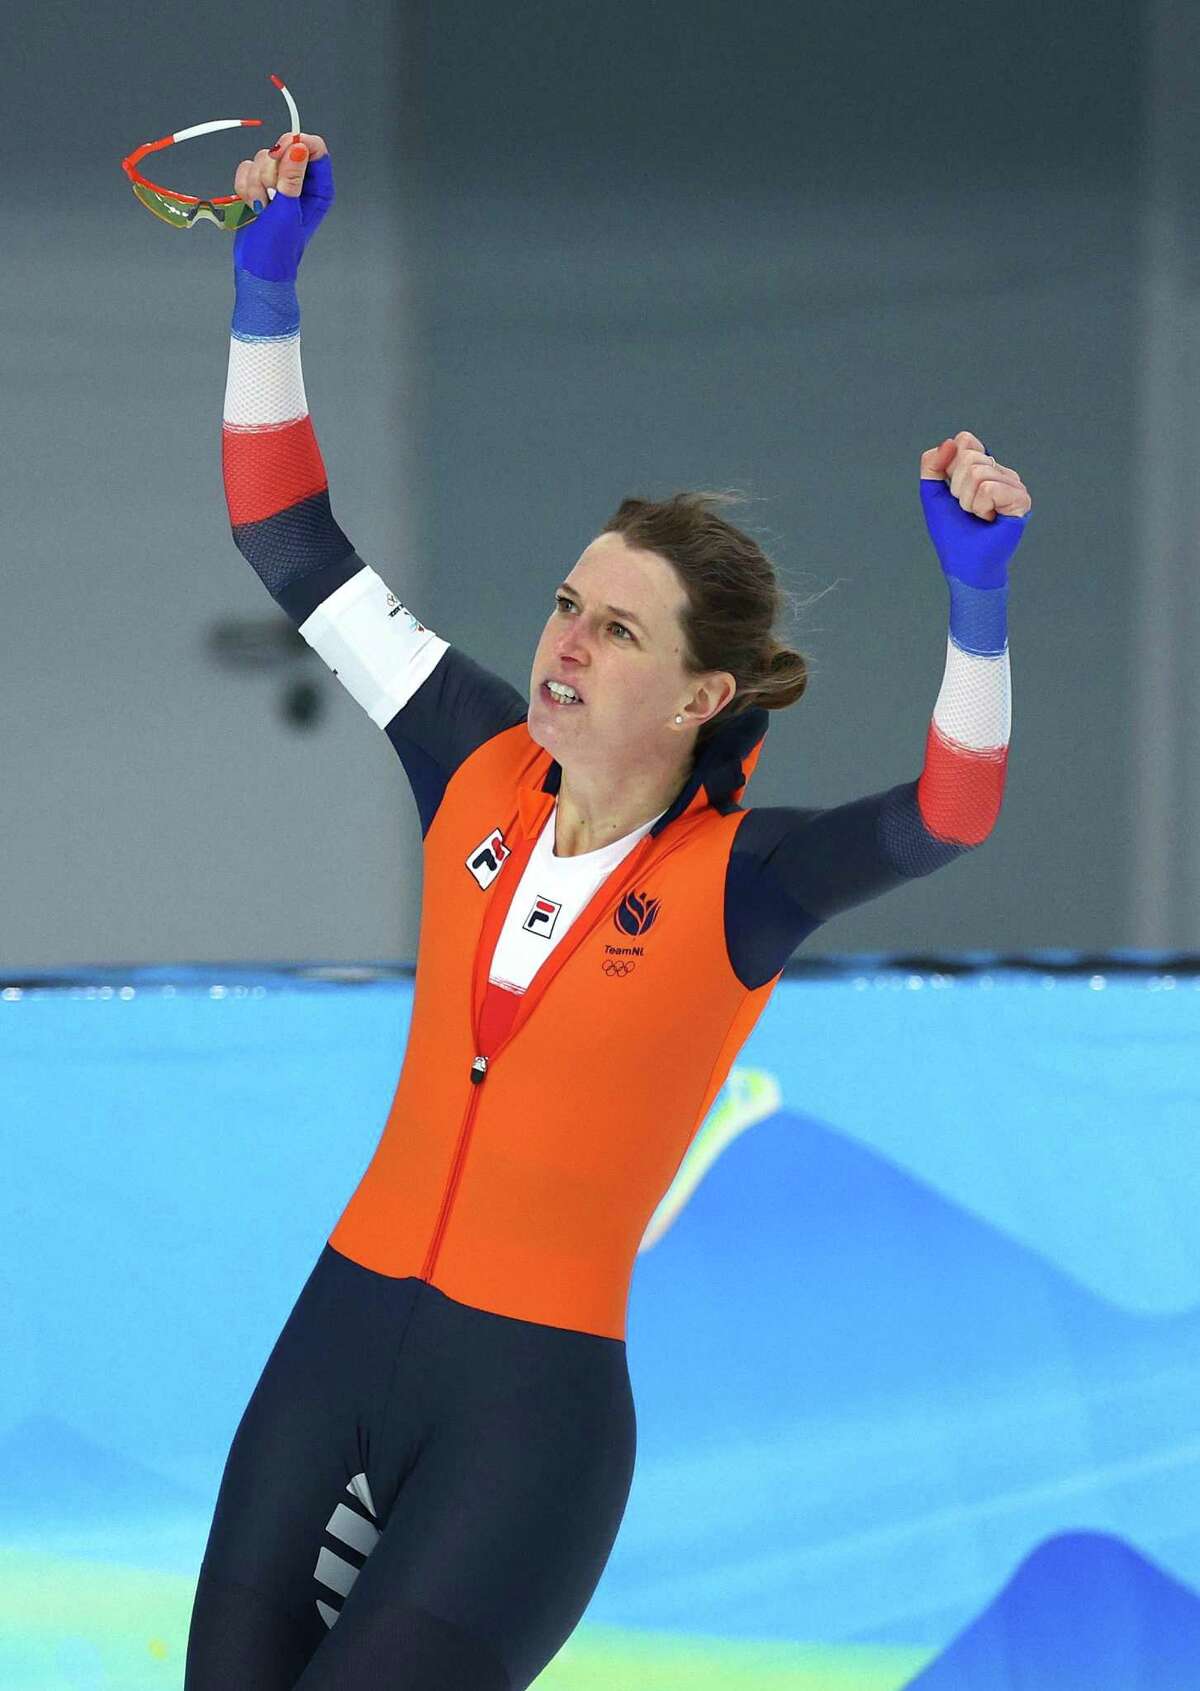 Ireen Wust’s victory in the 1,500 meters in a record time gave the Dutch speed skater a place in Olympic history.